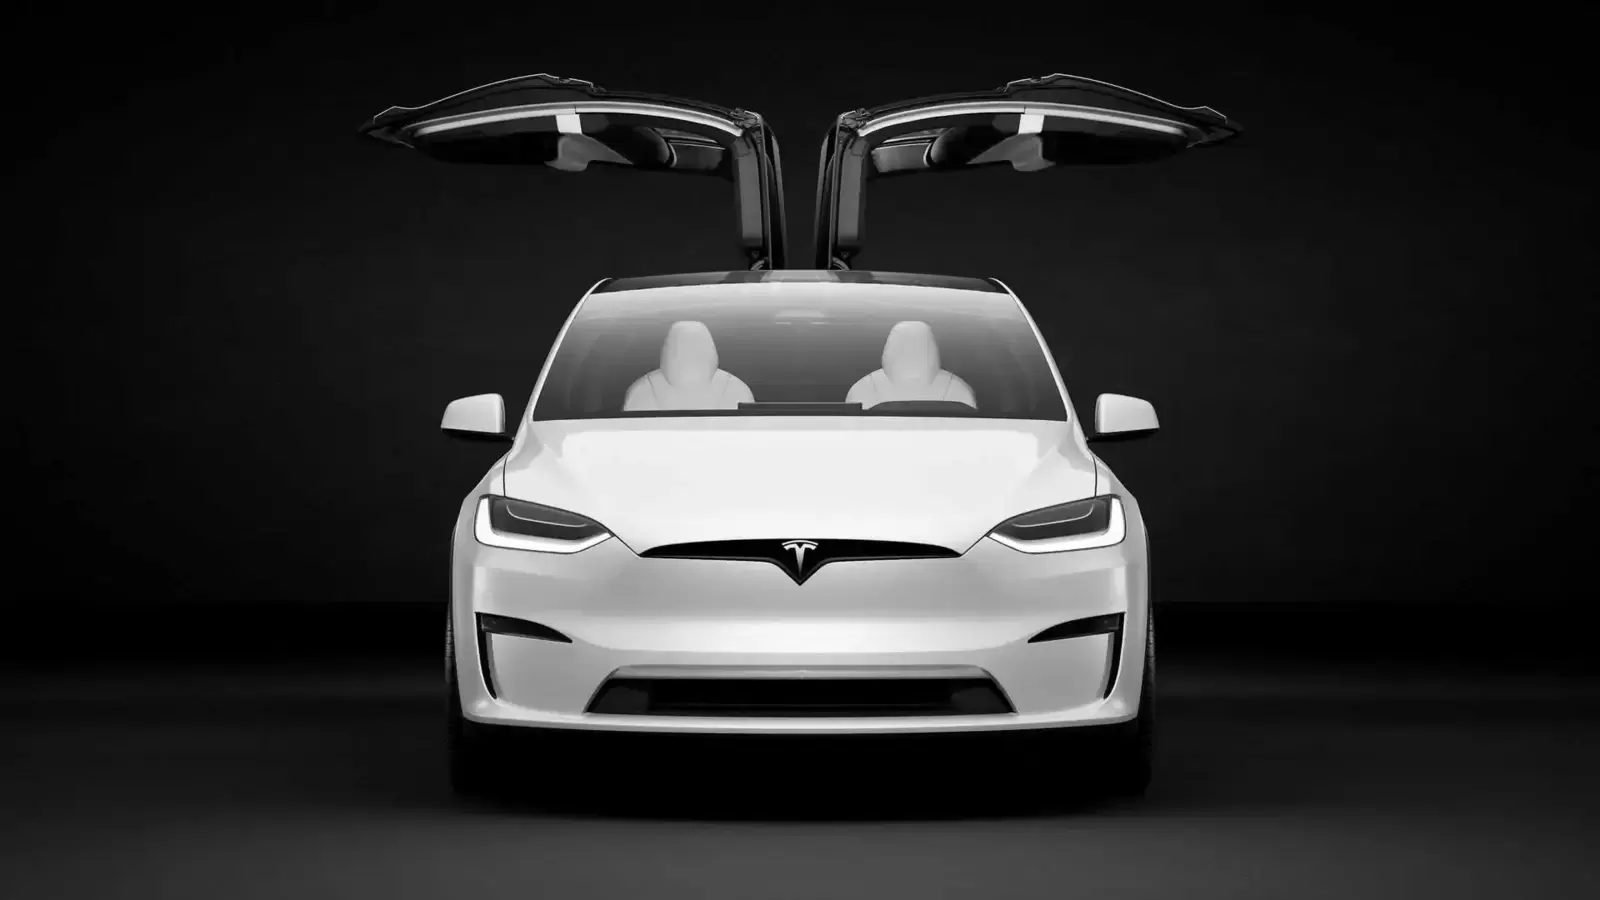 https://e-vehicleinfo.com/global/tesla-car-battery-replacement-cost-and-battery-warranty